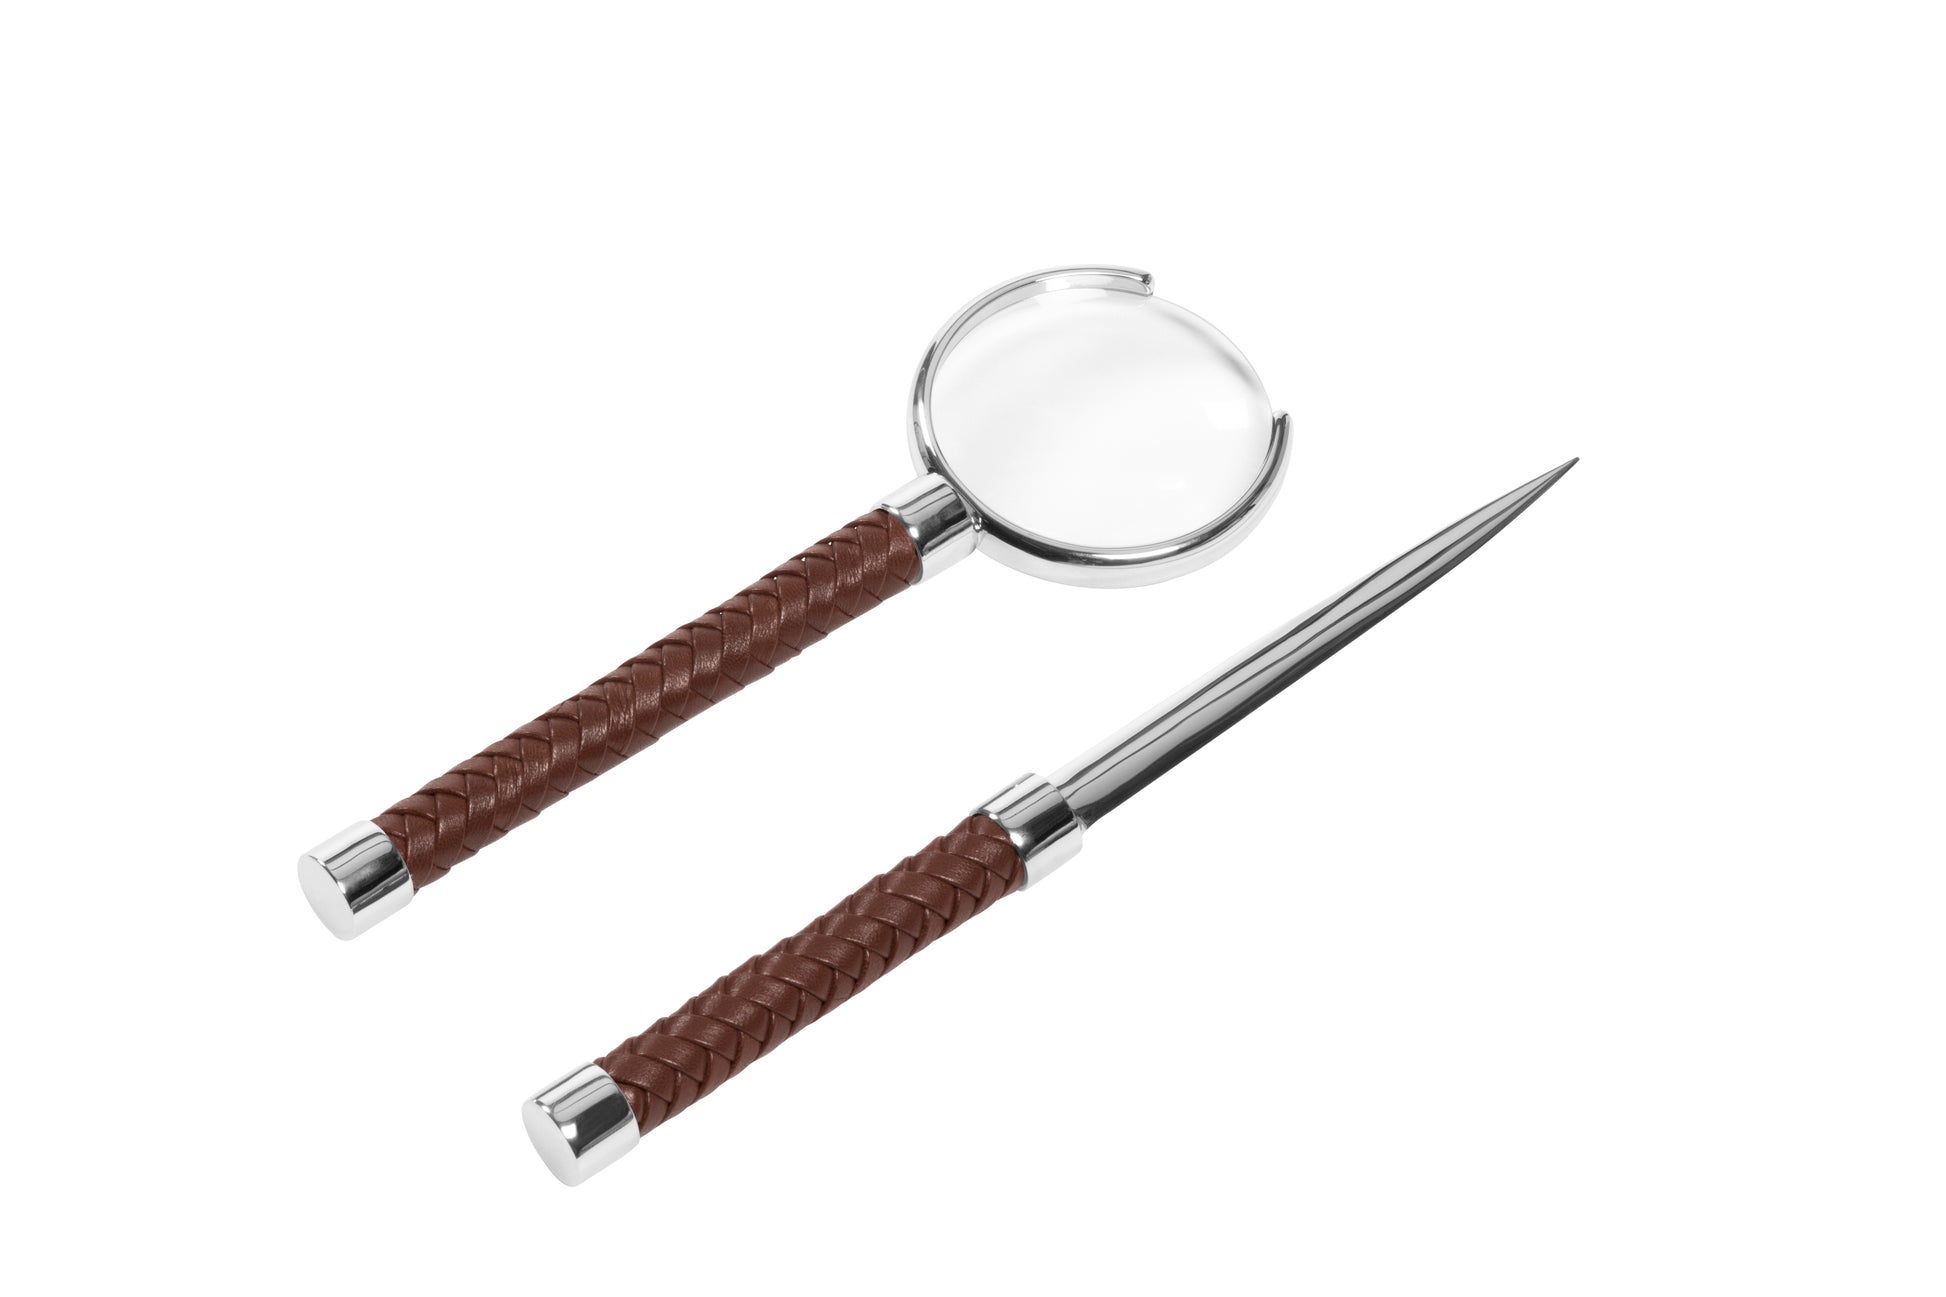 Riviere Celio Magnifier With Handwoven Leather Inserts | Exquisite Handcrafted Design | Perfect for Magnifying Small Print | Elevate Your Desk Essentials with Luxury Accessories from Riviere | Available at 2Jour Concierge, #1 luxury high-end gift & lifestyle shop